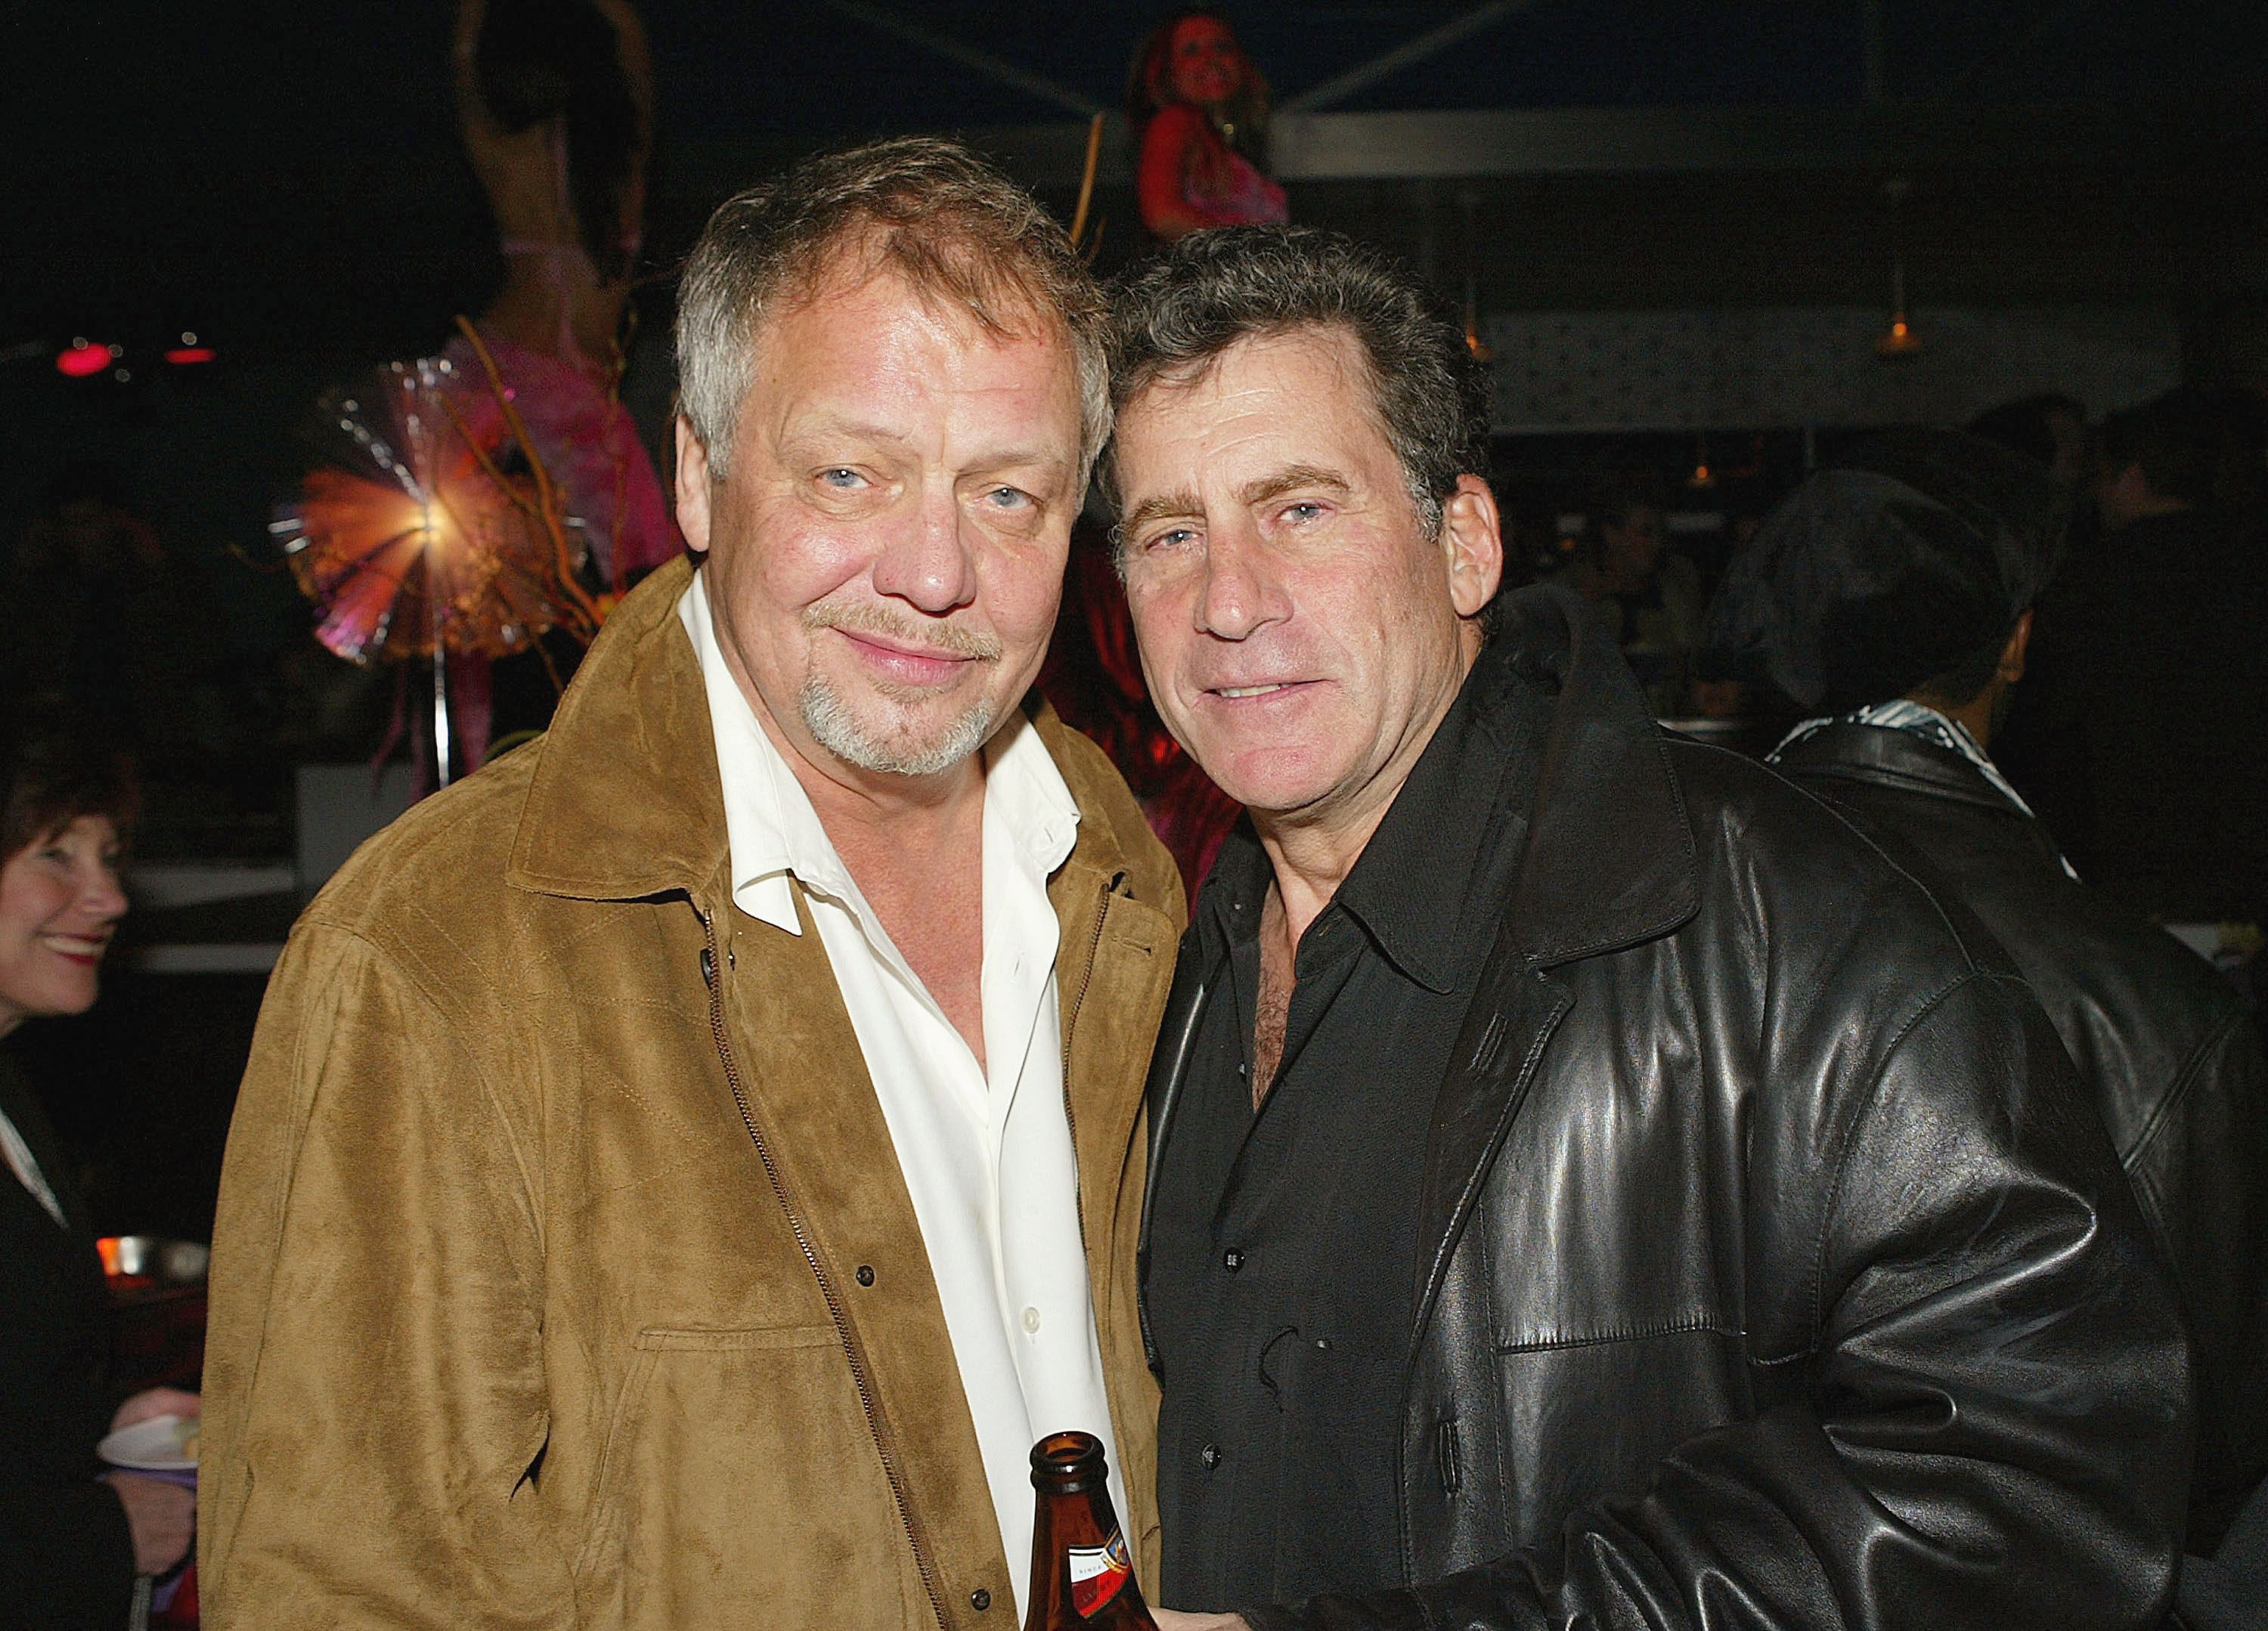 Starsky & Hutch stars David Soul, left, and Paul Micheal Glaser in 2004. Soul died on Thursday aged 80, his family announced on Friday. Photo: Getty Images North America / AFP